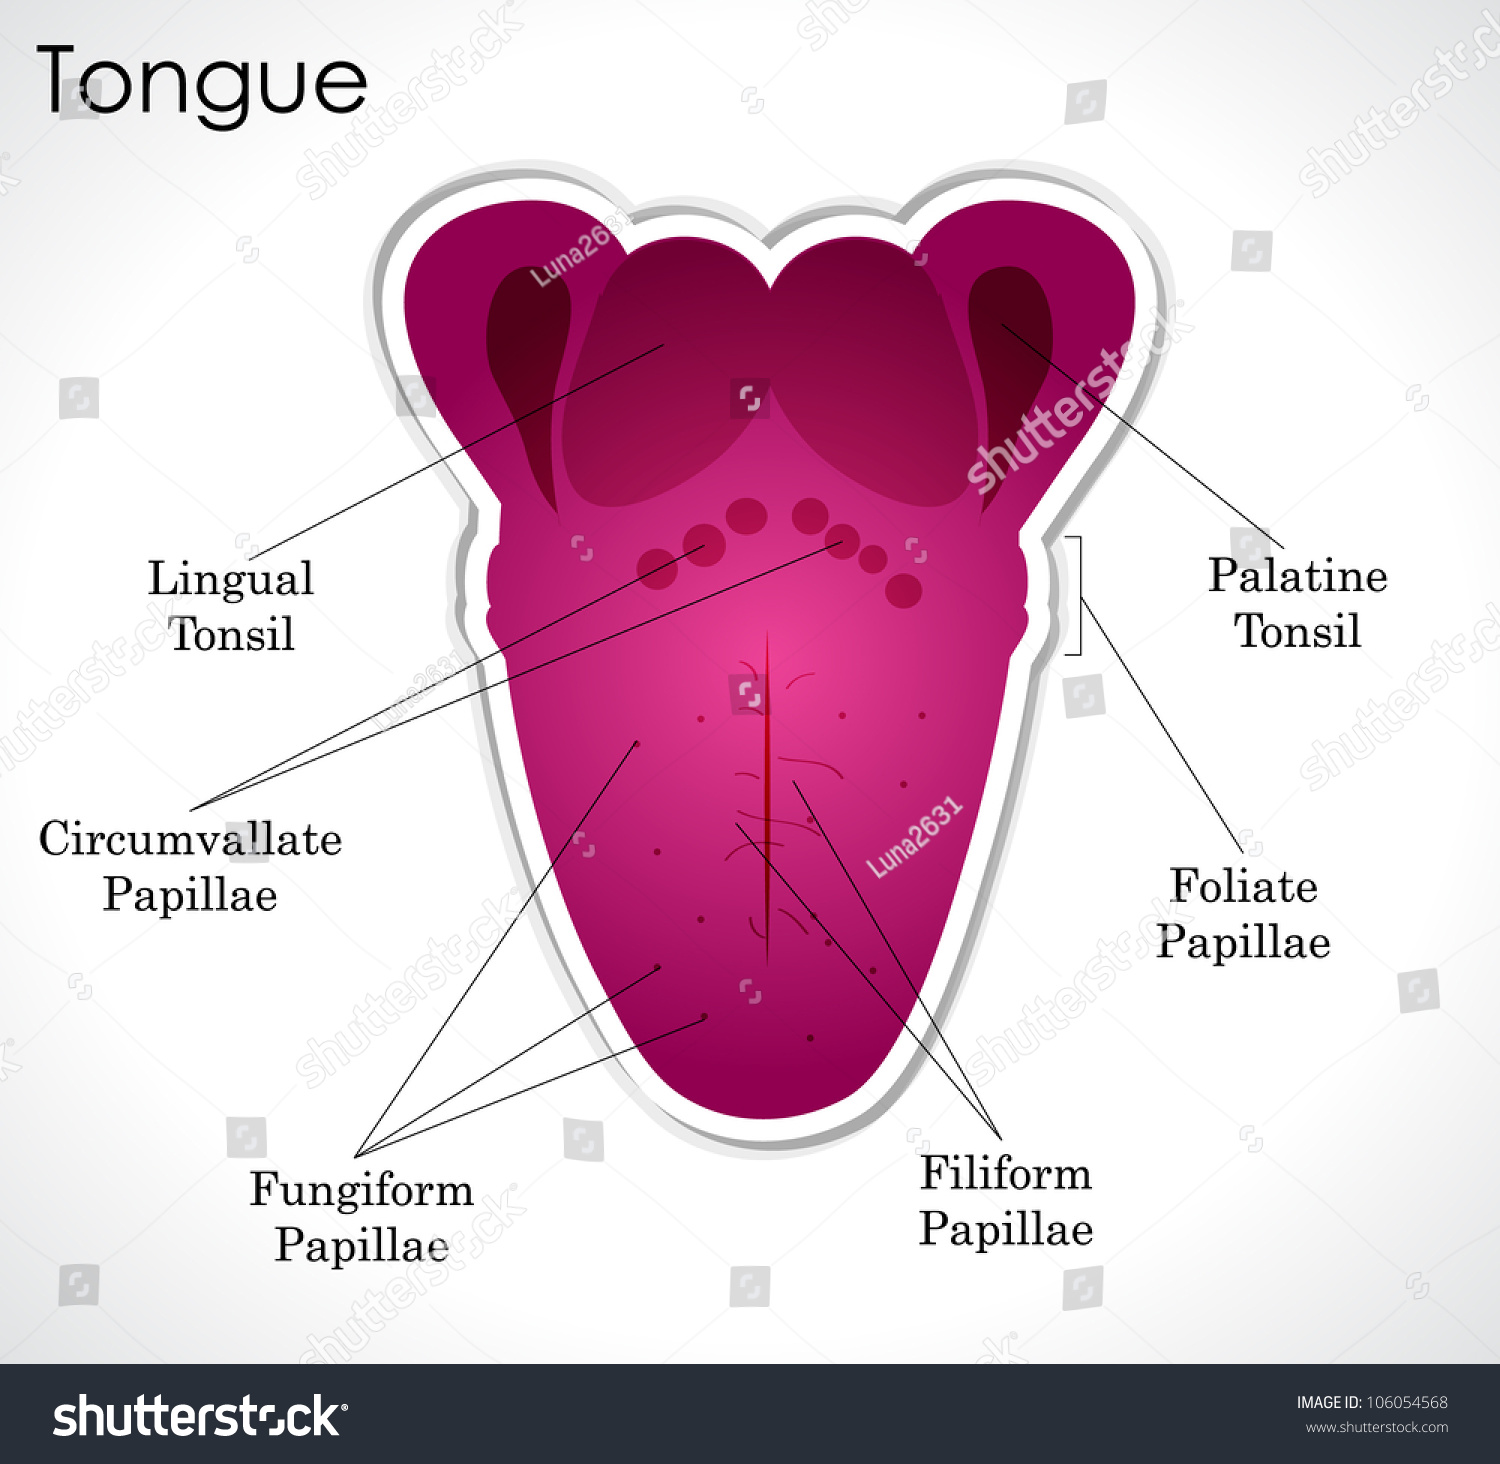 Anatomy Of The Human Tongue. Vector Version Is Also Available In This